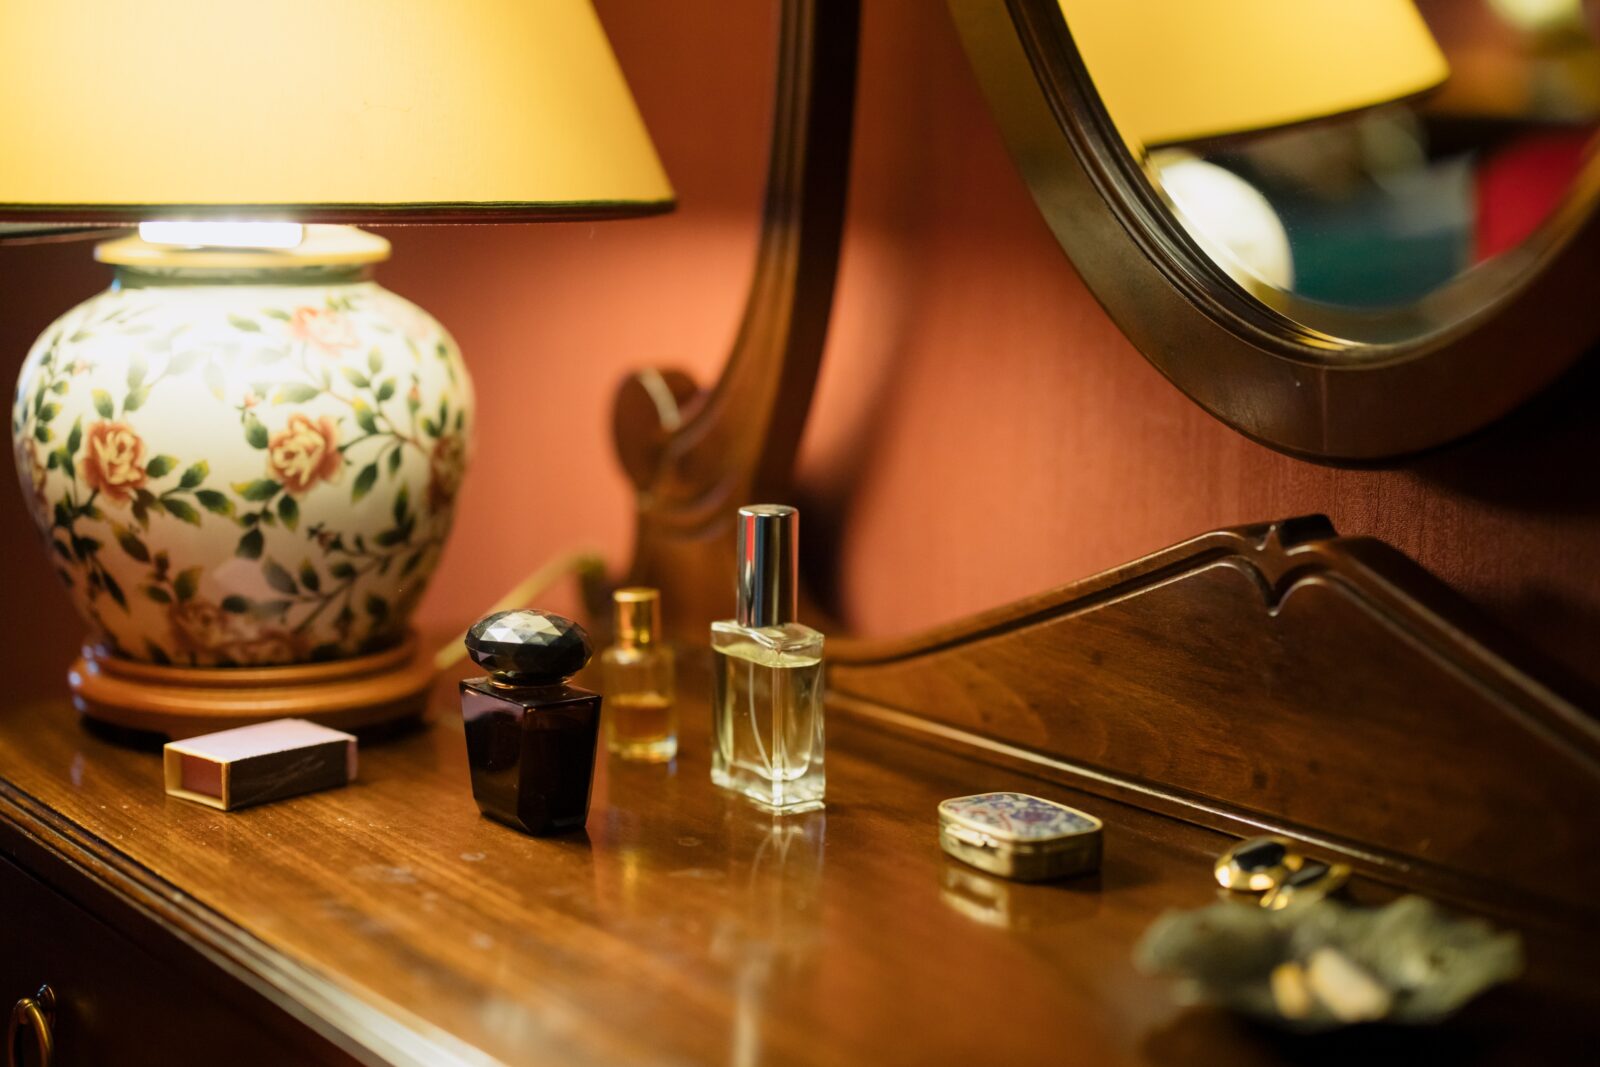 Glass perfume bottles on dressing table next to lamp